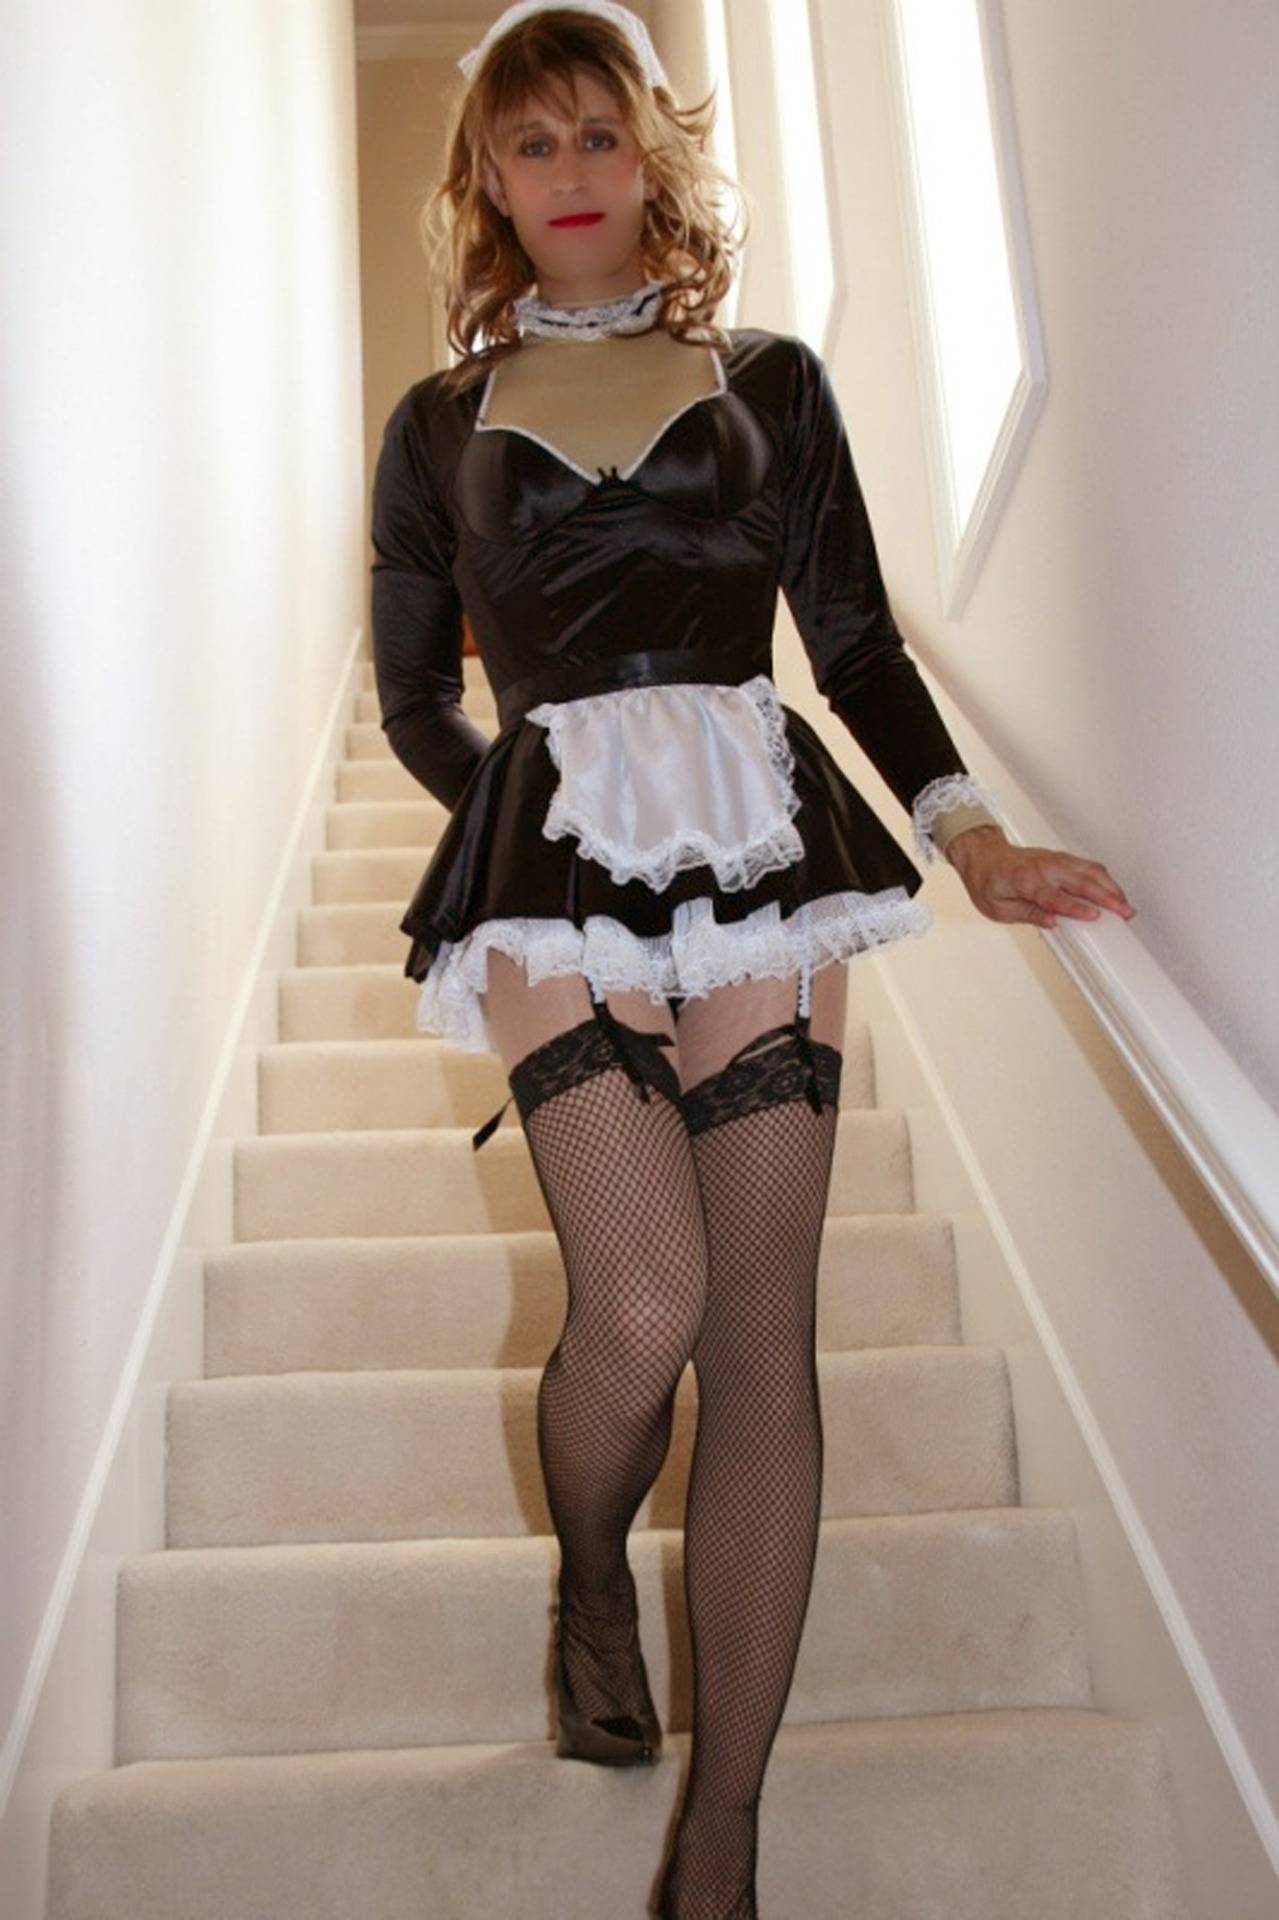 Autumn french maid